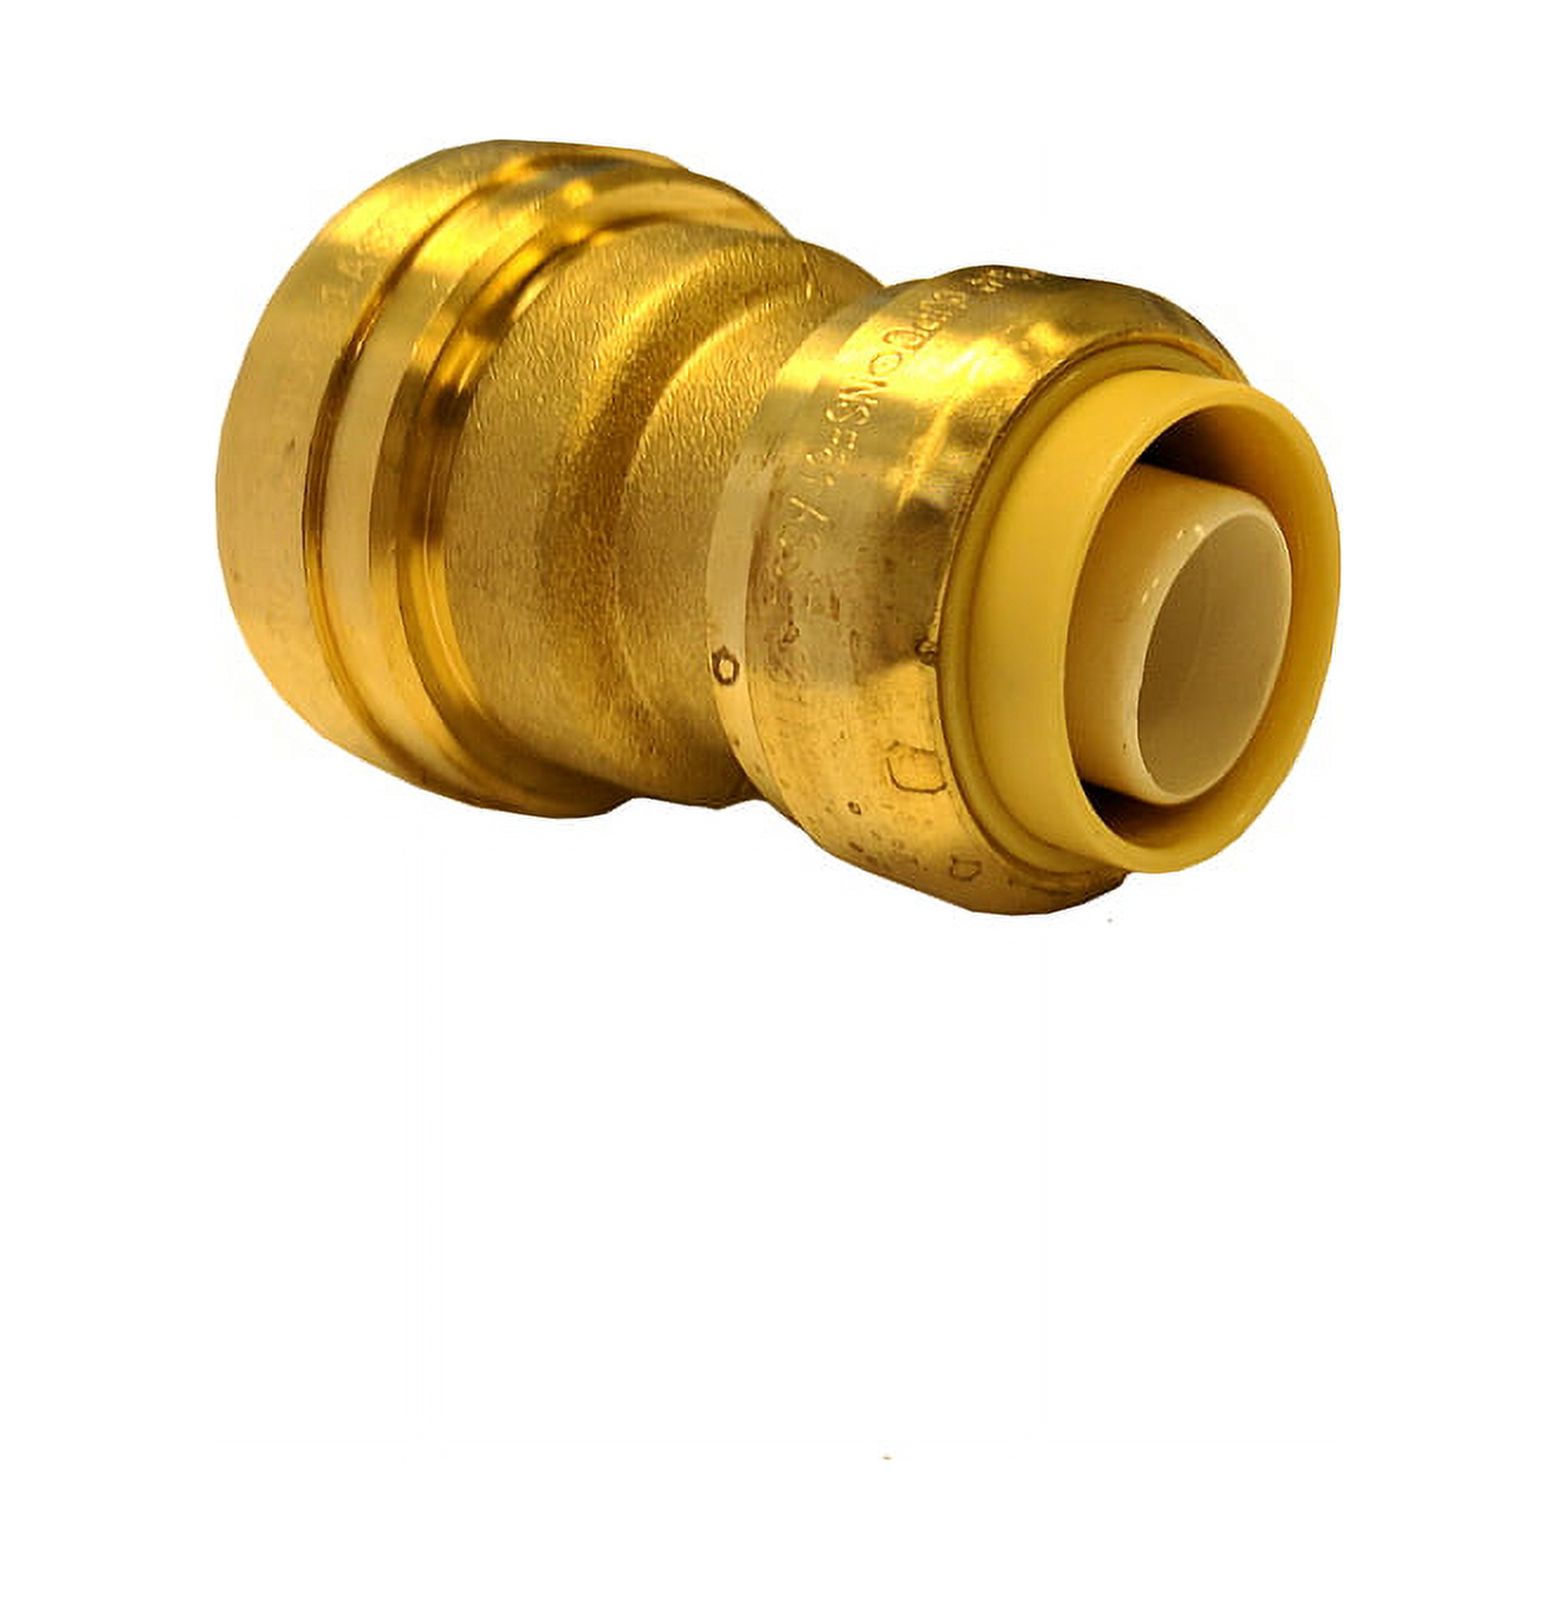 Libra Supply Lead Free 1-1/2 x 1-1/4 inch Push-Fit Coupling, Push to Connect, (Click in for more size options), 1-1/2'' x 1-1/4'', 1-1/2 x 1-1/4-inch, Fits copper tubing, CTS, CPVC and PEX - image 3 of 4